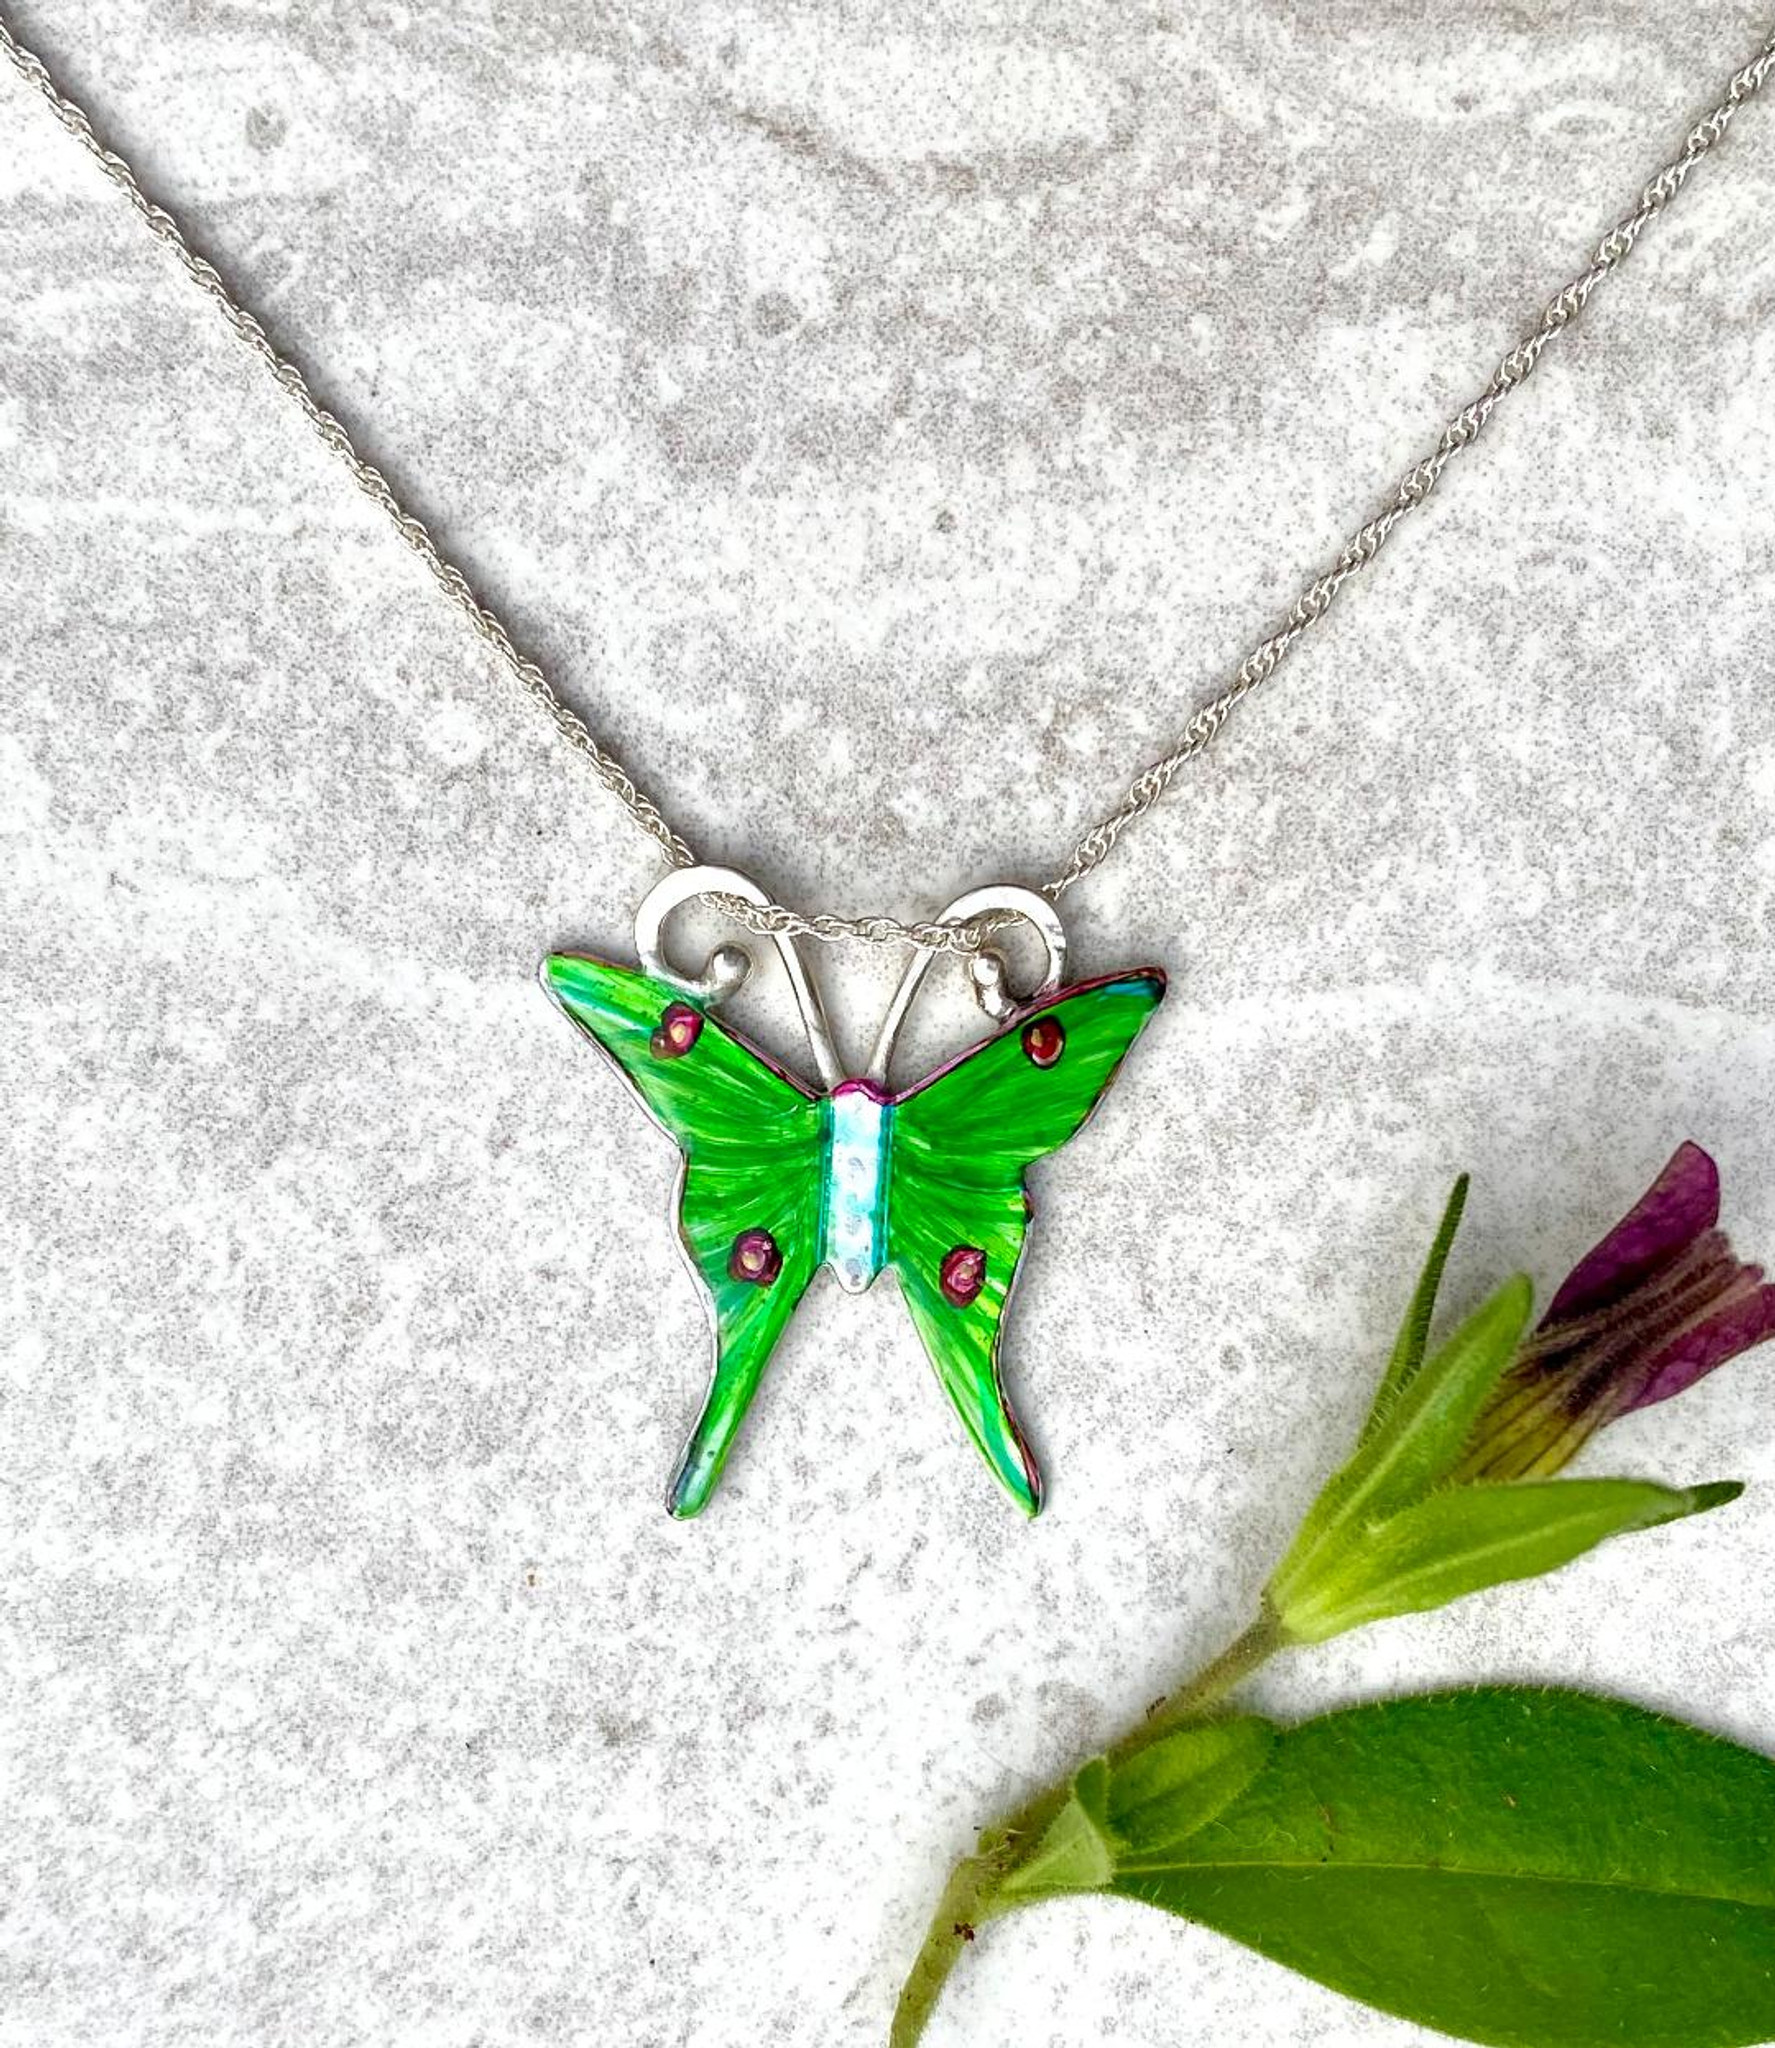 Butterfly Necklaces for sale in Bangalore, India | Facebook Marketplace |  Facebook